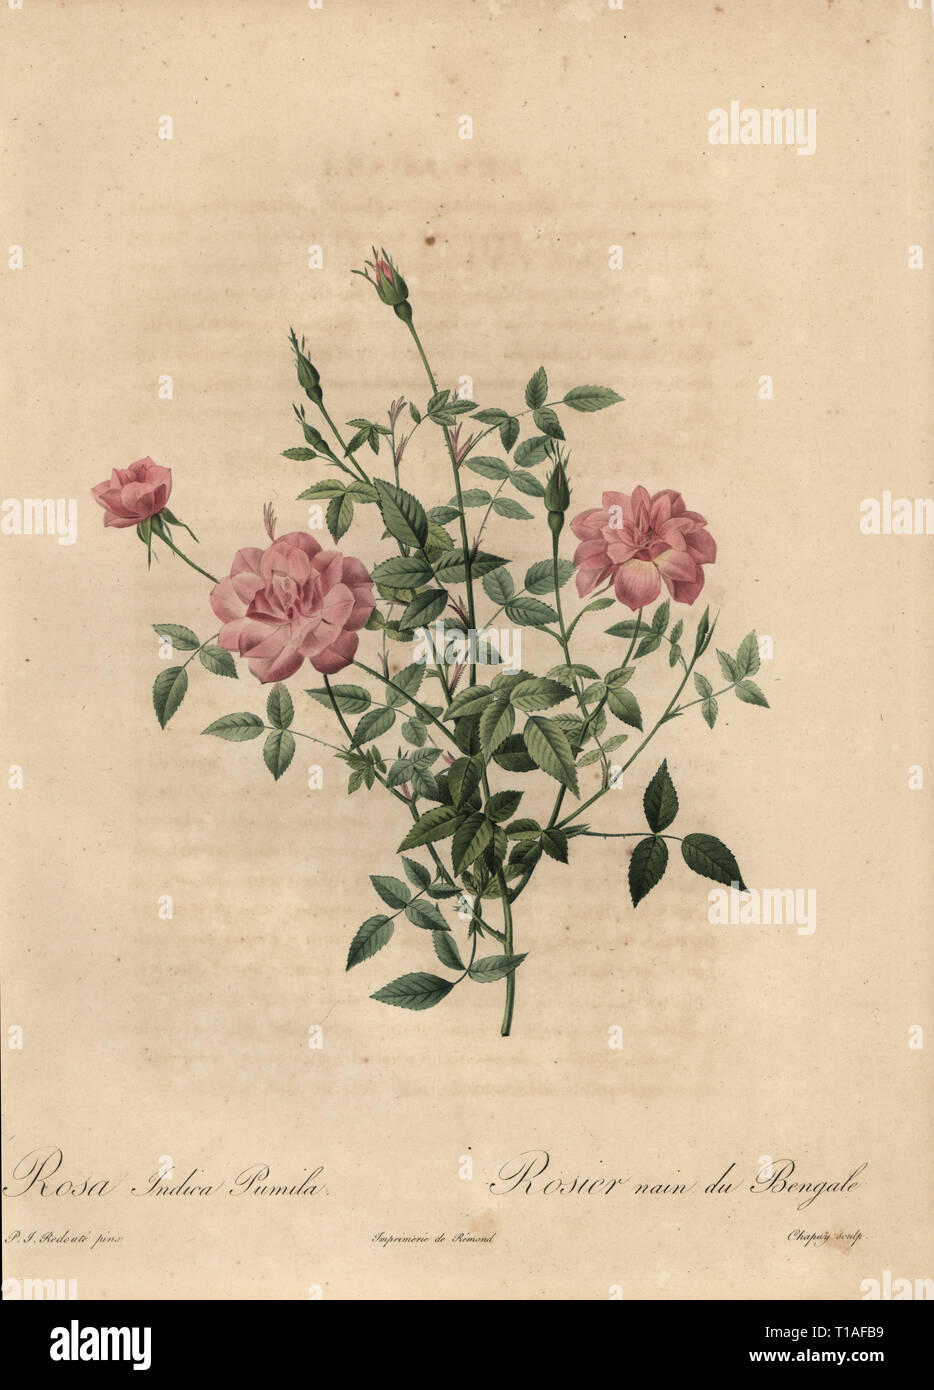 Pink miniature China rose, Rosa chinensis. Rosa indica pumila, Rosier nain du Bengale. Stipple copperplate engraving by Jean Baptiste Chapuy handcoloured a la poupee after a botanical illustration by Pierre-Joseph Redoute from the first folio edition of Les Roses, Firmin Didot, Paris, 1817. Stock Photo